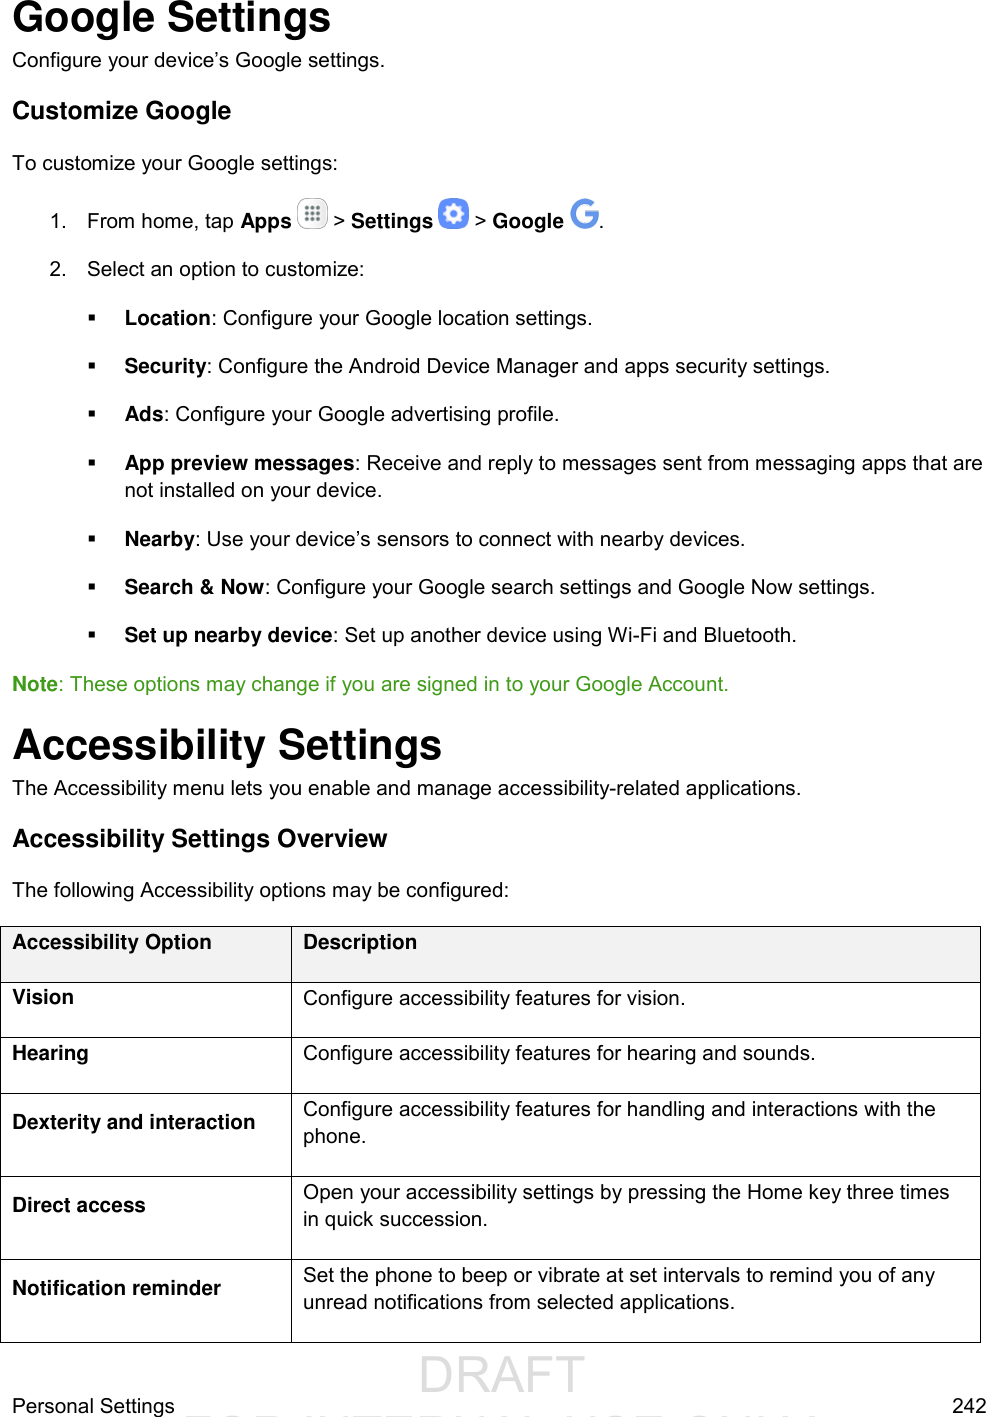                  DRAFT FOR INTERNAL USE ONLYPersonal Settings  242 Google Settings Configure your device’s Google settings. Customize Google To customize your Google settings: 1.  From home, tap Apps   &gt; Settings   &gt; Google  . 2.  Select an option to customize:  Location: Configure your Google location settings.  Security: Configure the Android Device Manager and apps security settings.  Ads: Configure your Google advertising profile.  App preview messages: Receive and reply to messages sent from messaging apps that are not installed on your device.  Nearby: Use your device’s sensors to connect with nearby devices.  Search &amp; Now: Configure your Google search settings and Google Now settings.  Set up nearby device: Set up another device using Wi-Fi and Bluetooth. Note: These options may change if you are signed in to your Google Account. Accessibility Settings The Accessibility menu lets you enable and manage accessibility-related applications. Accessibility Settings Overview The following Accessibility options may be configured:  Accessibility Option Description Vision Configure accessibility features for vision. Hearing Configure accessibility features for hearing and sounds. Dexterity and interaction Configure accessibility features for handling and interactions with the phone. Direct access Open your accessibility settings by pressing the Home key three times in quick succession. Notification reminder Set the phone to beep or vibrate at set intervals to remind you of any unread notifications from selected applications. 